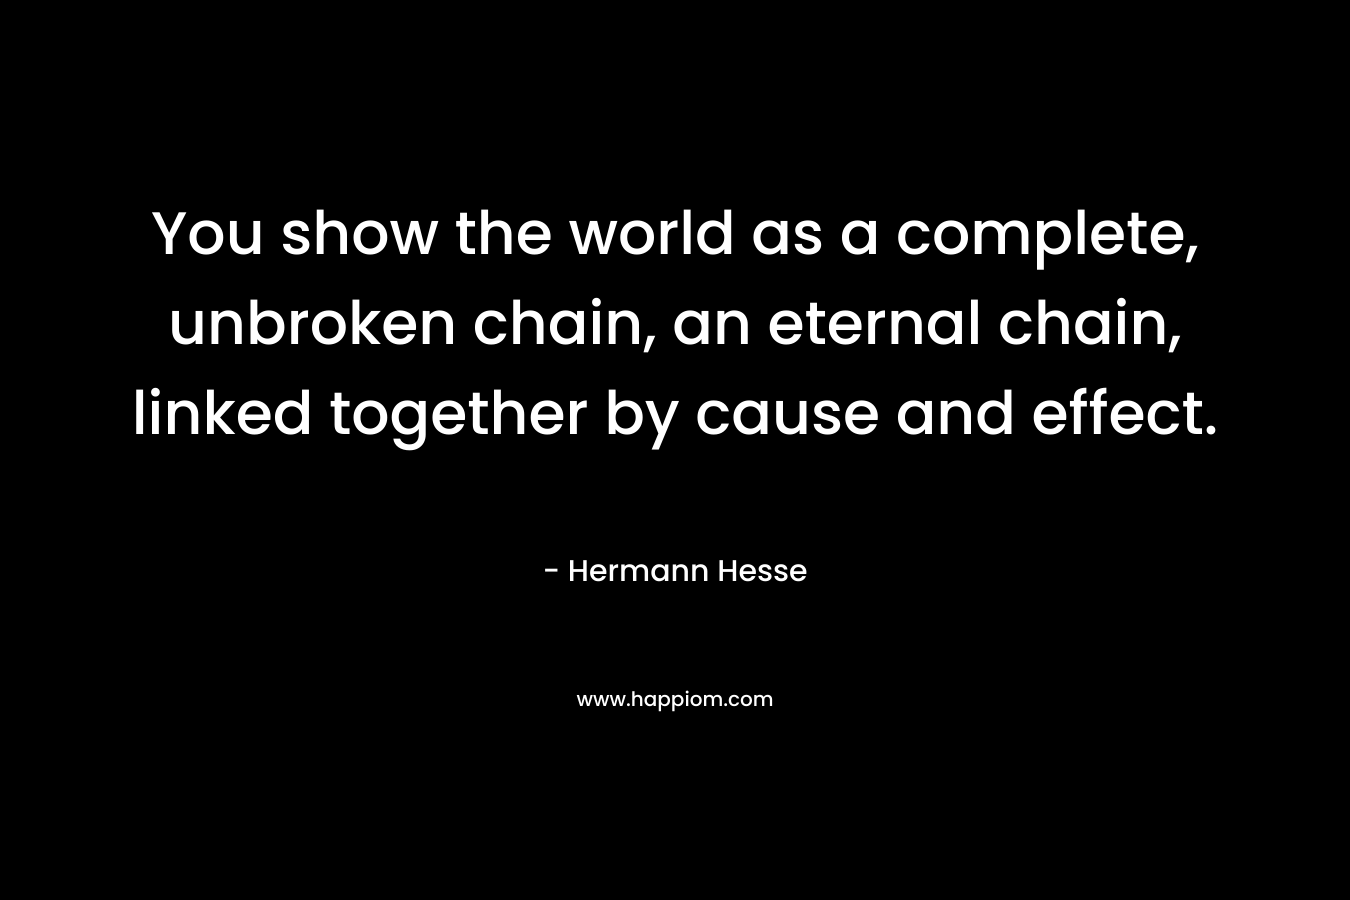 You show the world as a complete, unbroken chain, an eternal chain, linked together by cause and effect.